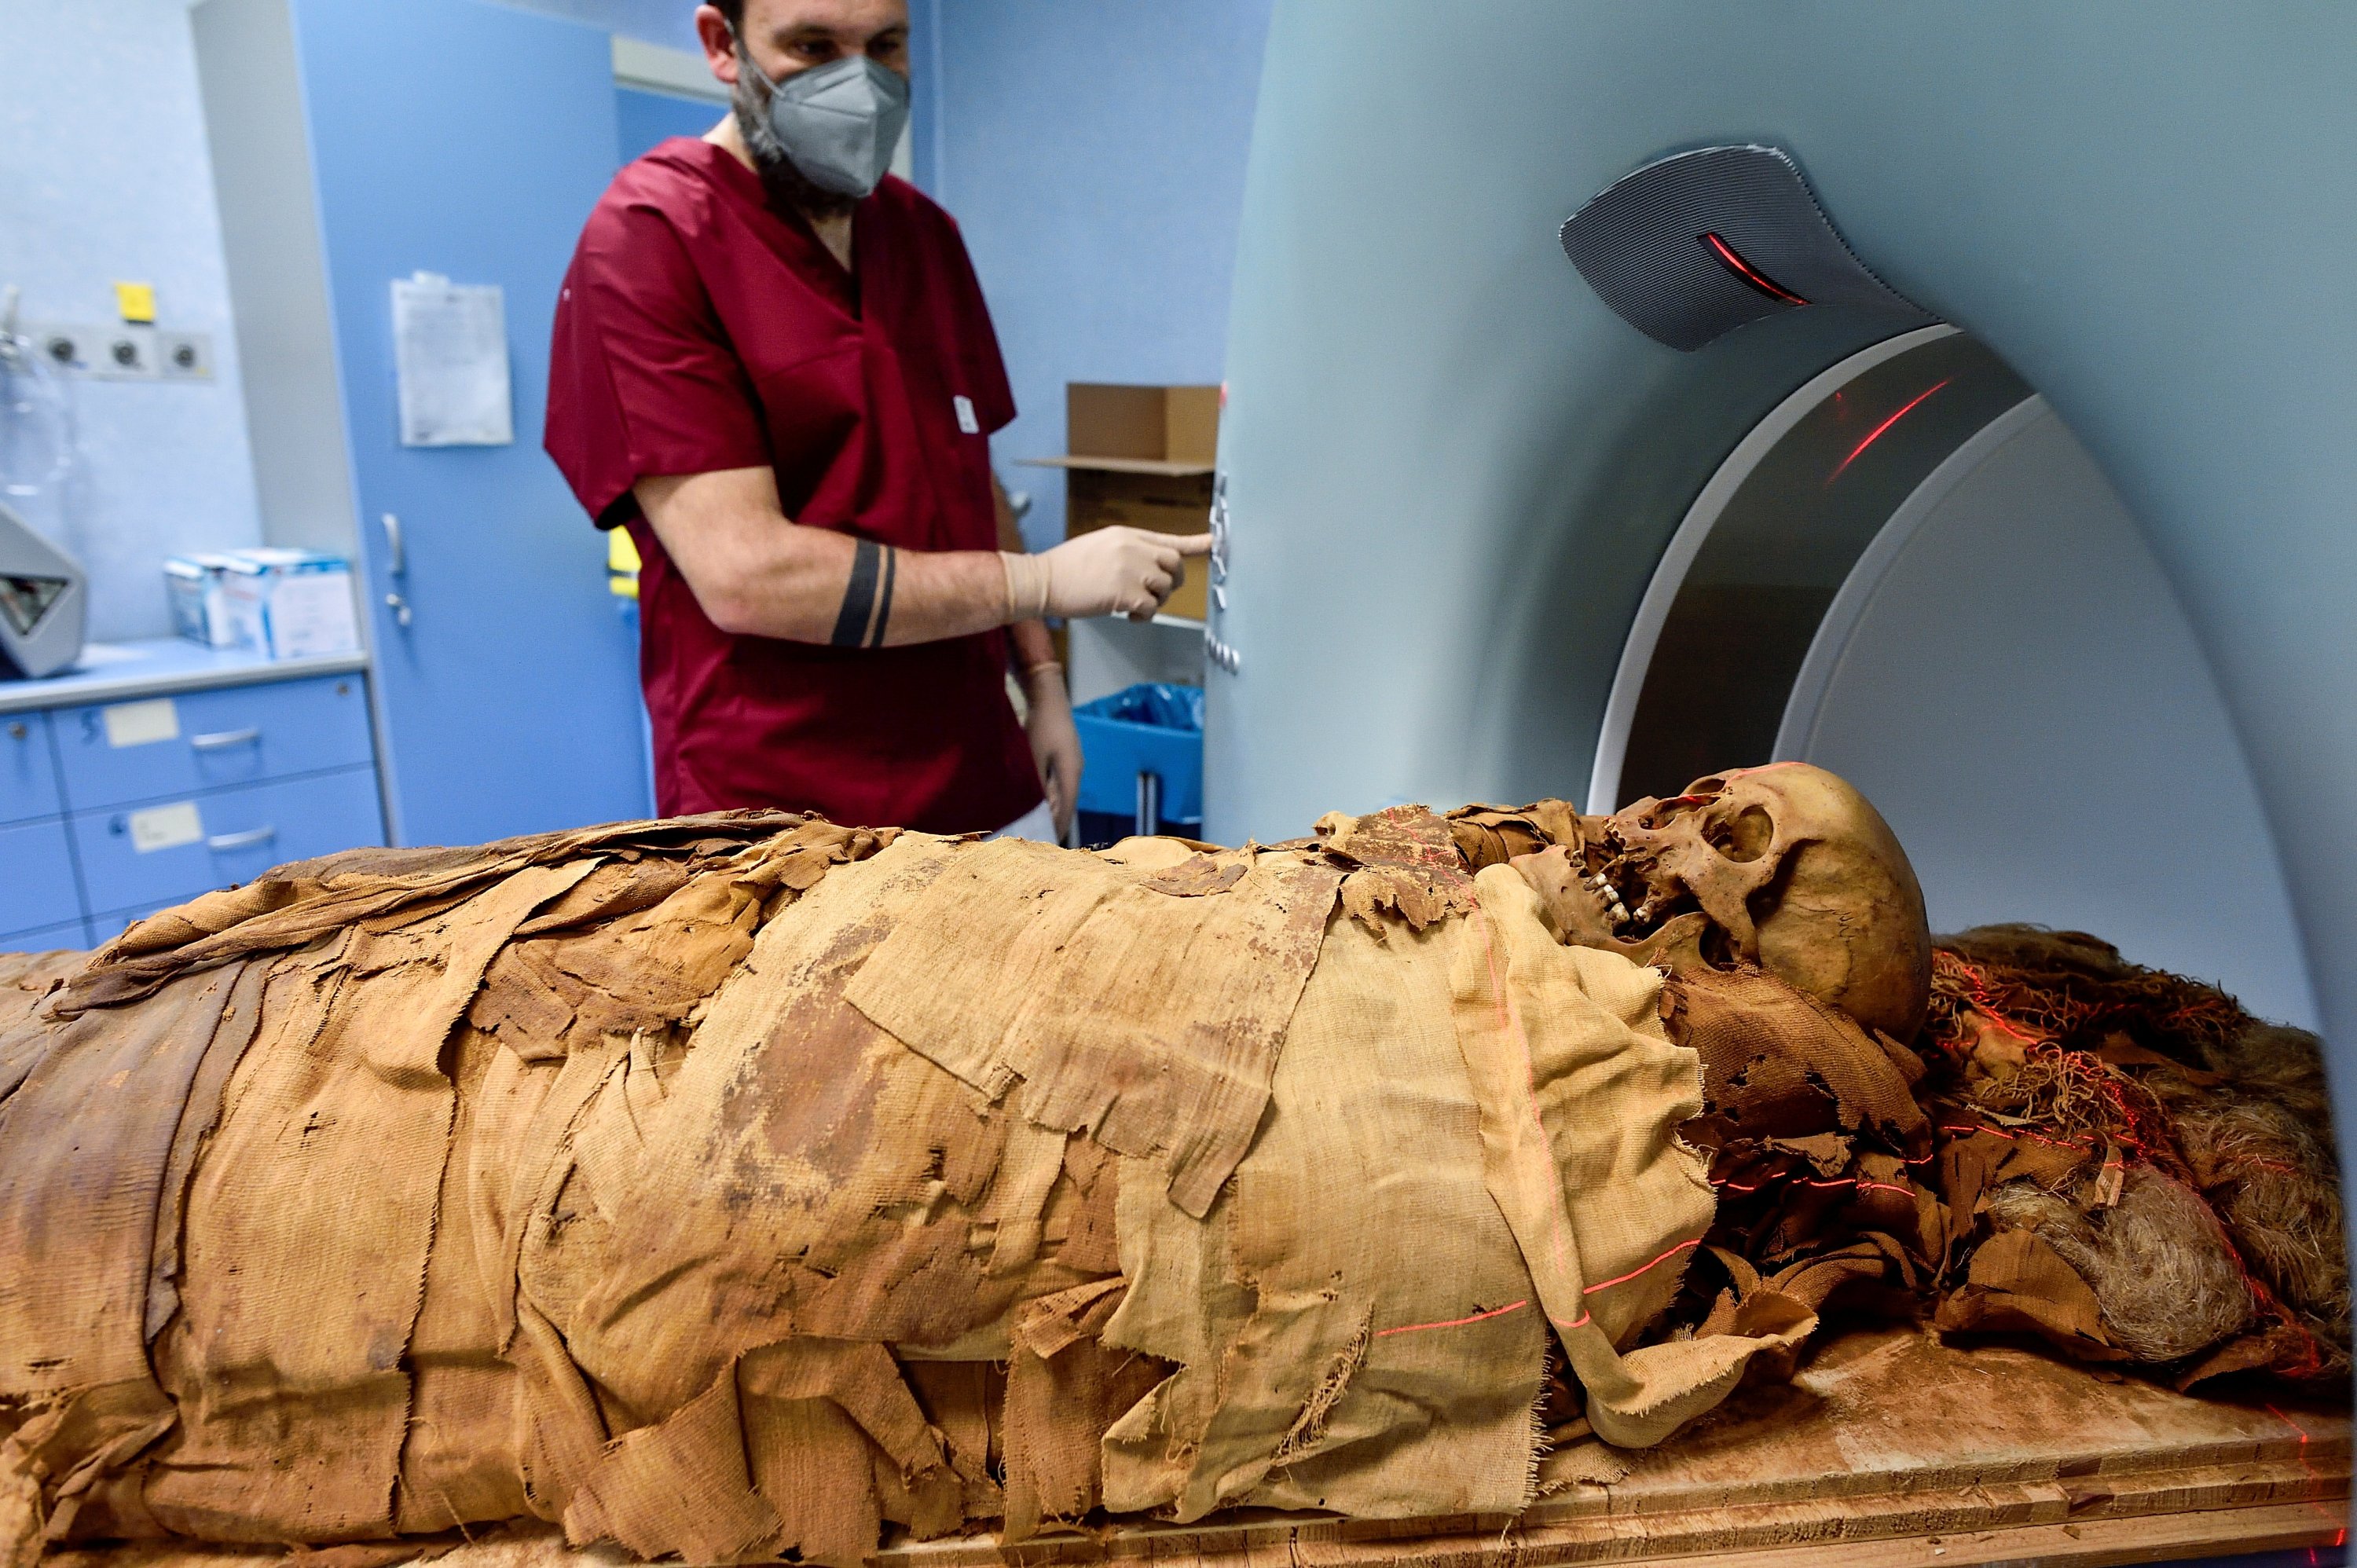 A medical radiology technician prepares a CT scan to do a radiological examination of an Egyptian mummy in order to investigate its history at the Policlinico hospital in Milan, Italy, June 21, 2021. (Reuters Photo)